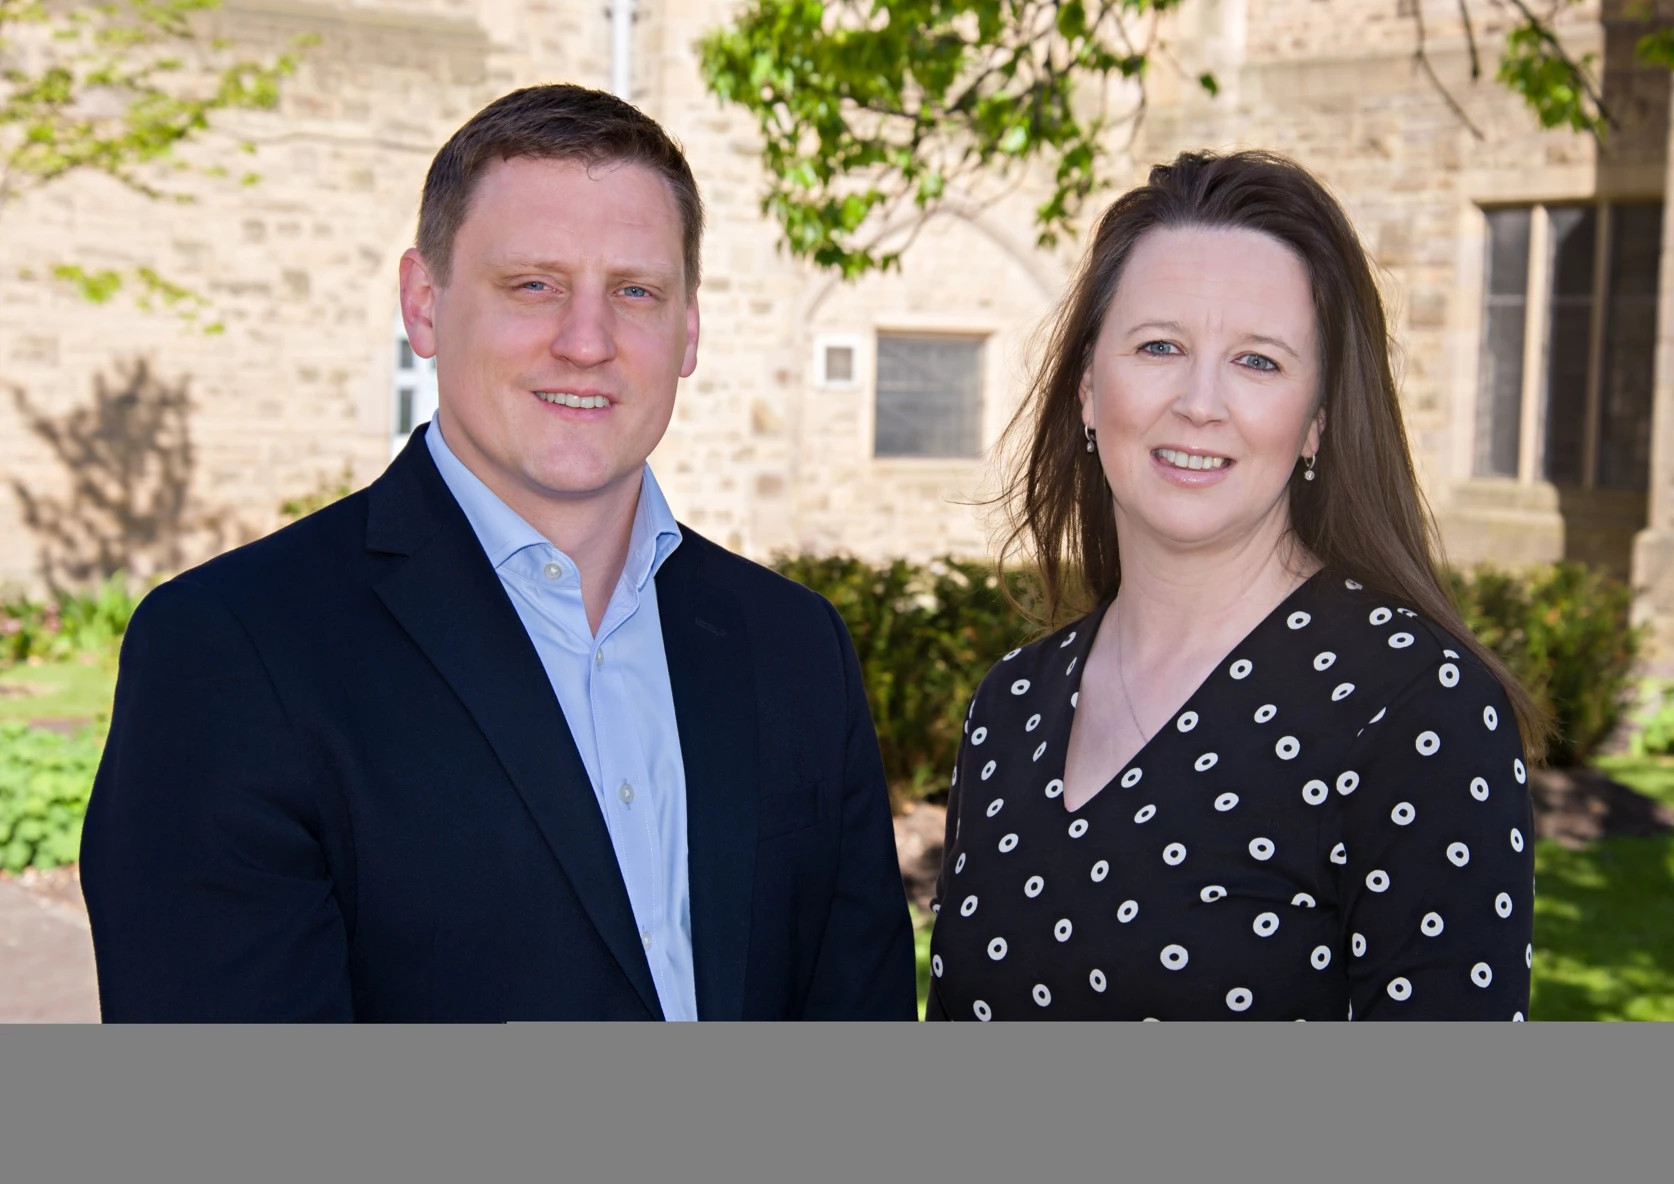 Stuart Beatson and Claire Barnes have been appointed partners at Taylors solicitors.